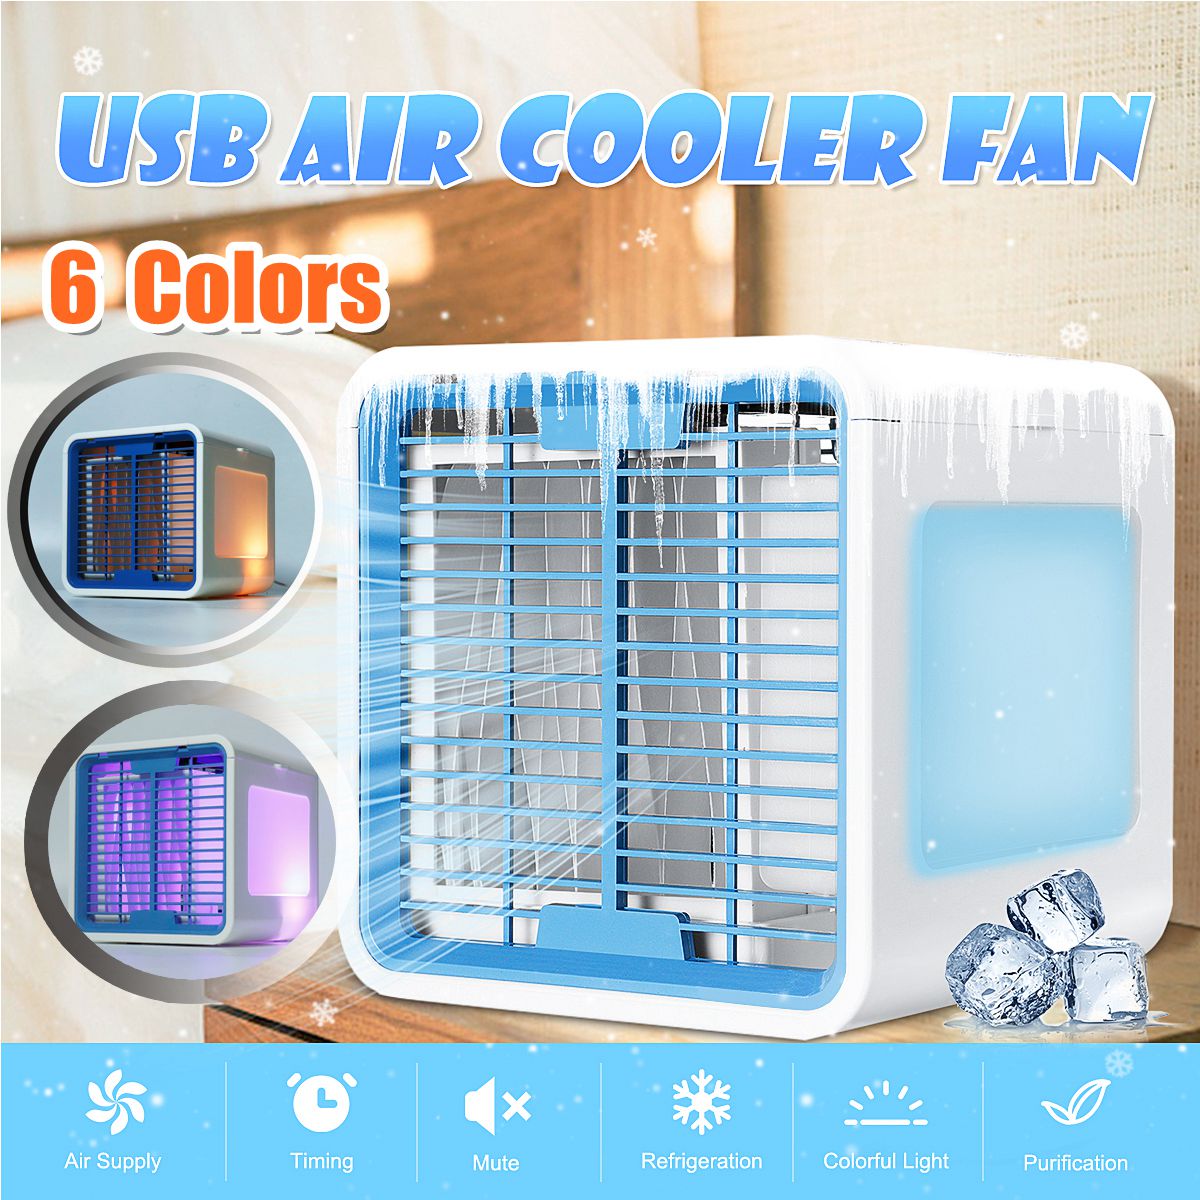 Display-Personal-Air-Cooler-USB-Portable-3-In-1-Refrigeration-Humidification-Purification-LED-Table--1516587-3